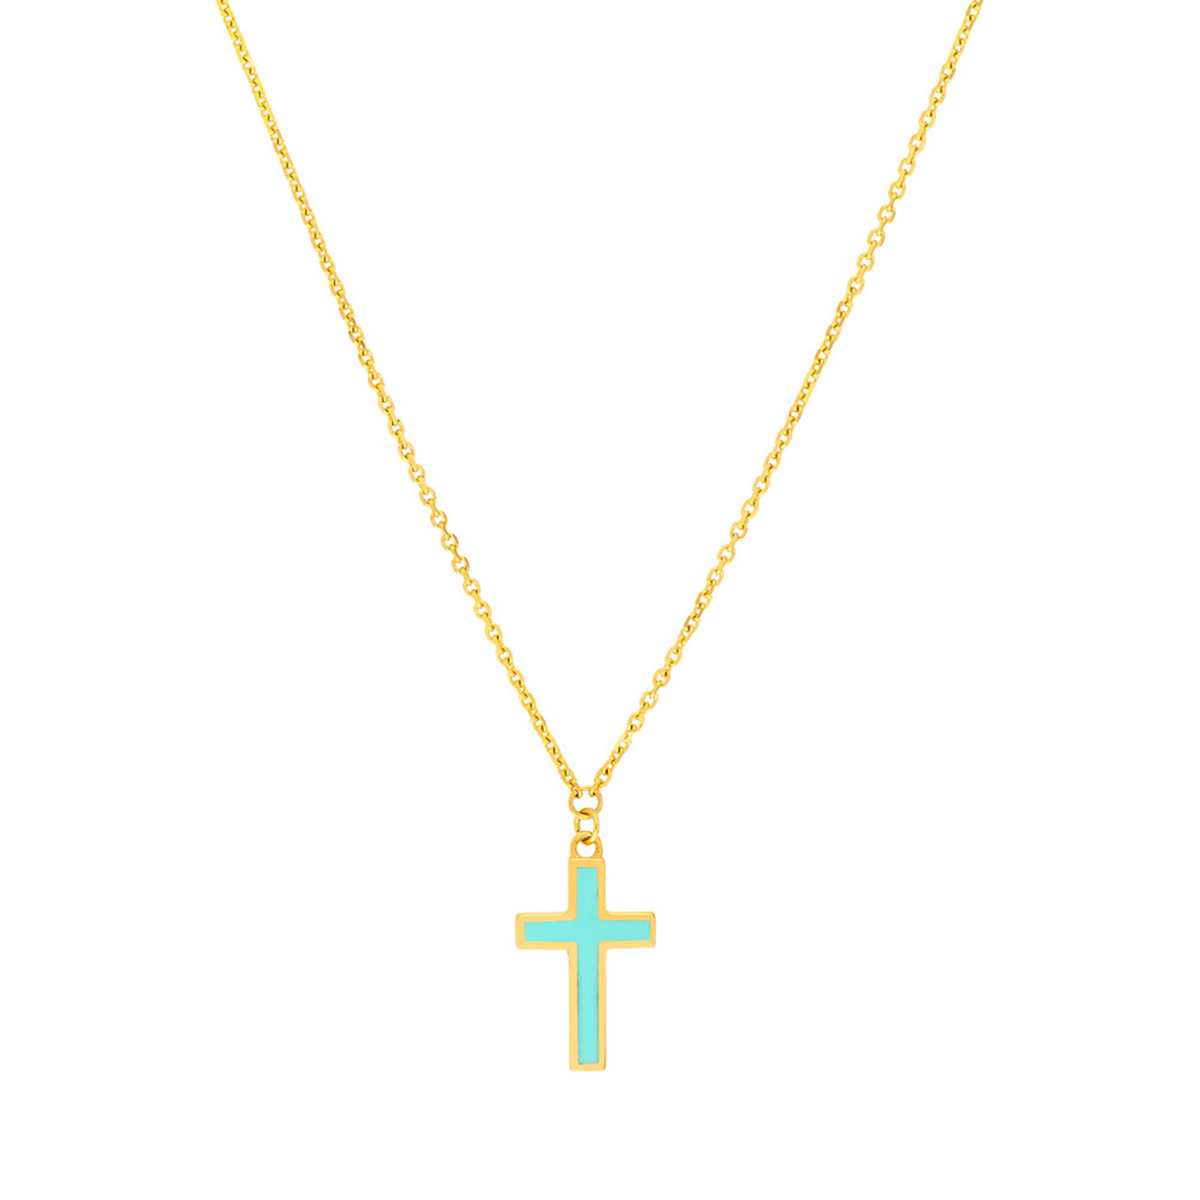 Image of 14K Solid Yellow Gold Turquoise Cross Adjustable Necklace